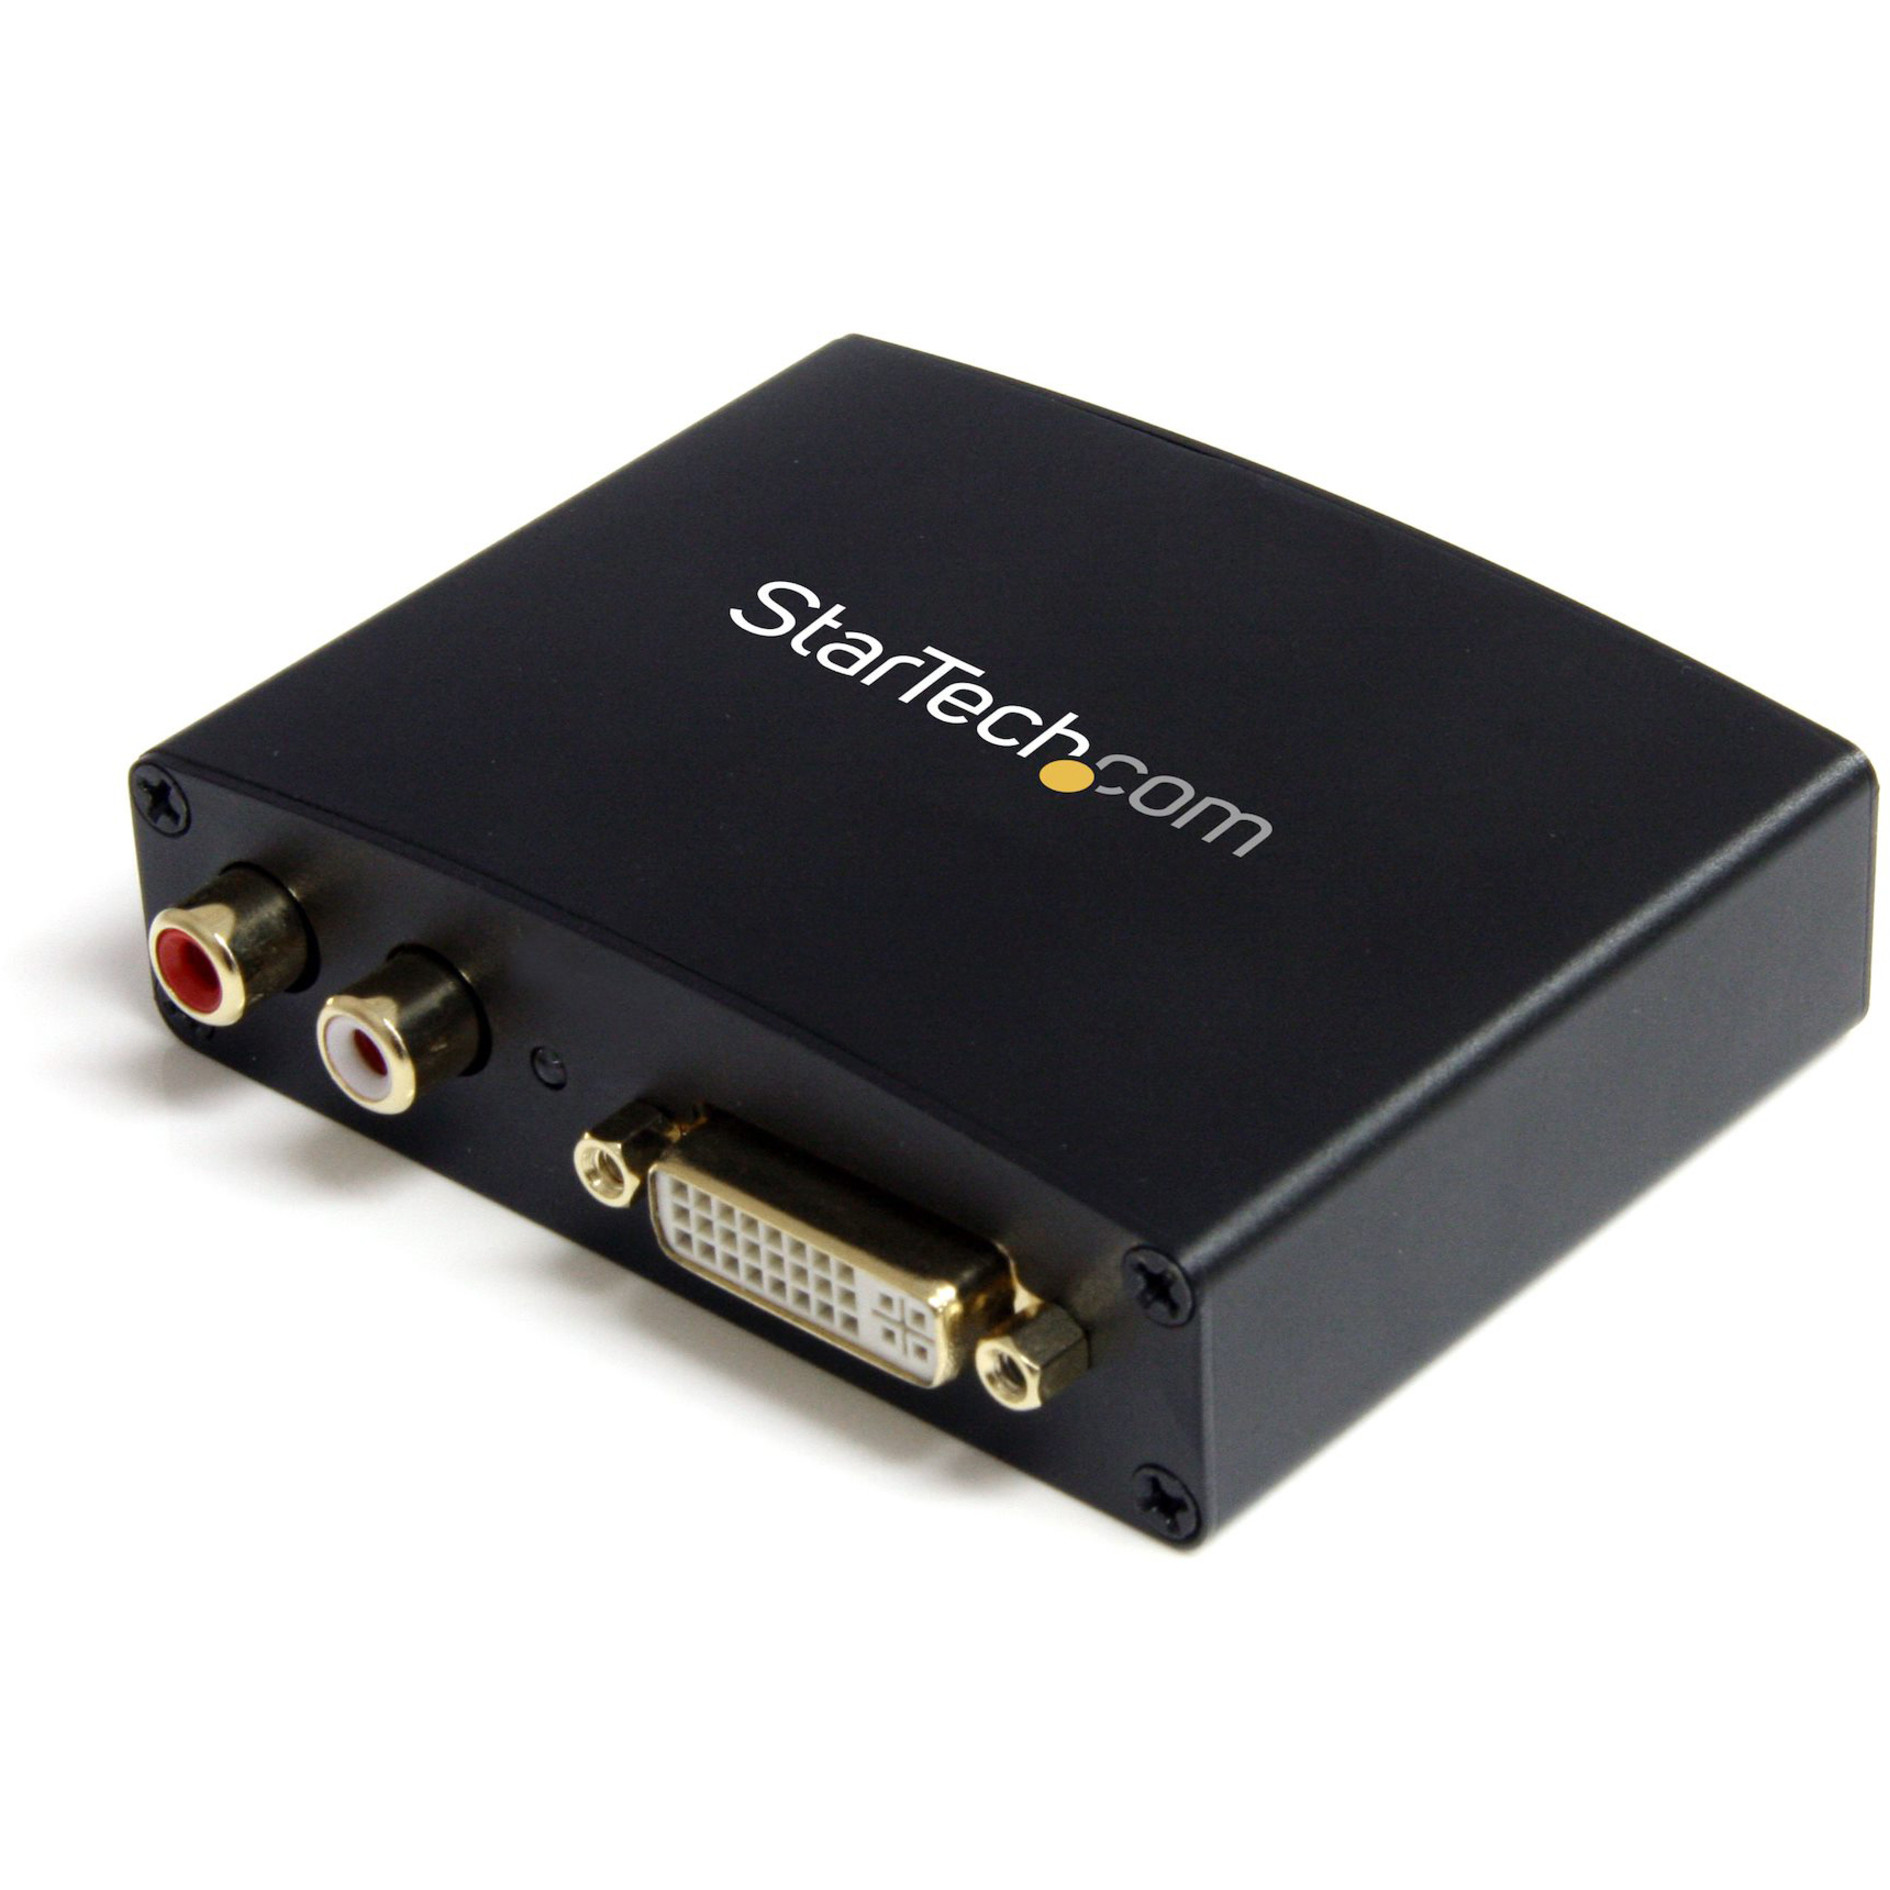 Feje færge Kartofler Startech .com DVI to HDMI Video Converter with AudioConnect a DVI-D source  device with RCA audio to an HDMI monitor/televisiondisplayport... DVI2HDMIA  - Corporate Armor